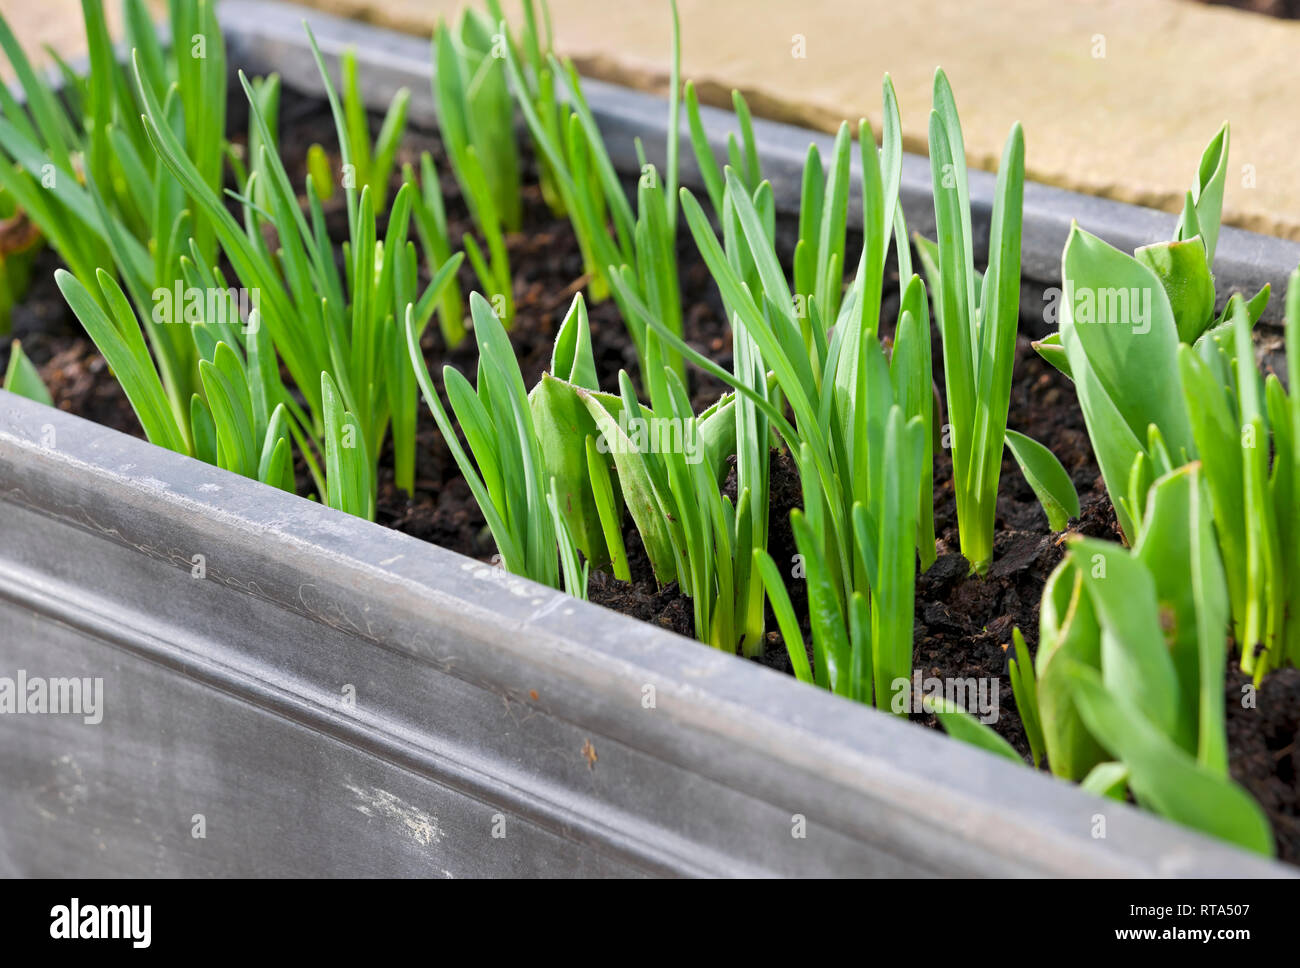 Close up of green shoots of daffodils and tulips spring bulbs growing in a trough in spring England UK United Kingdom GB Great Britain Stock Photo